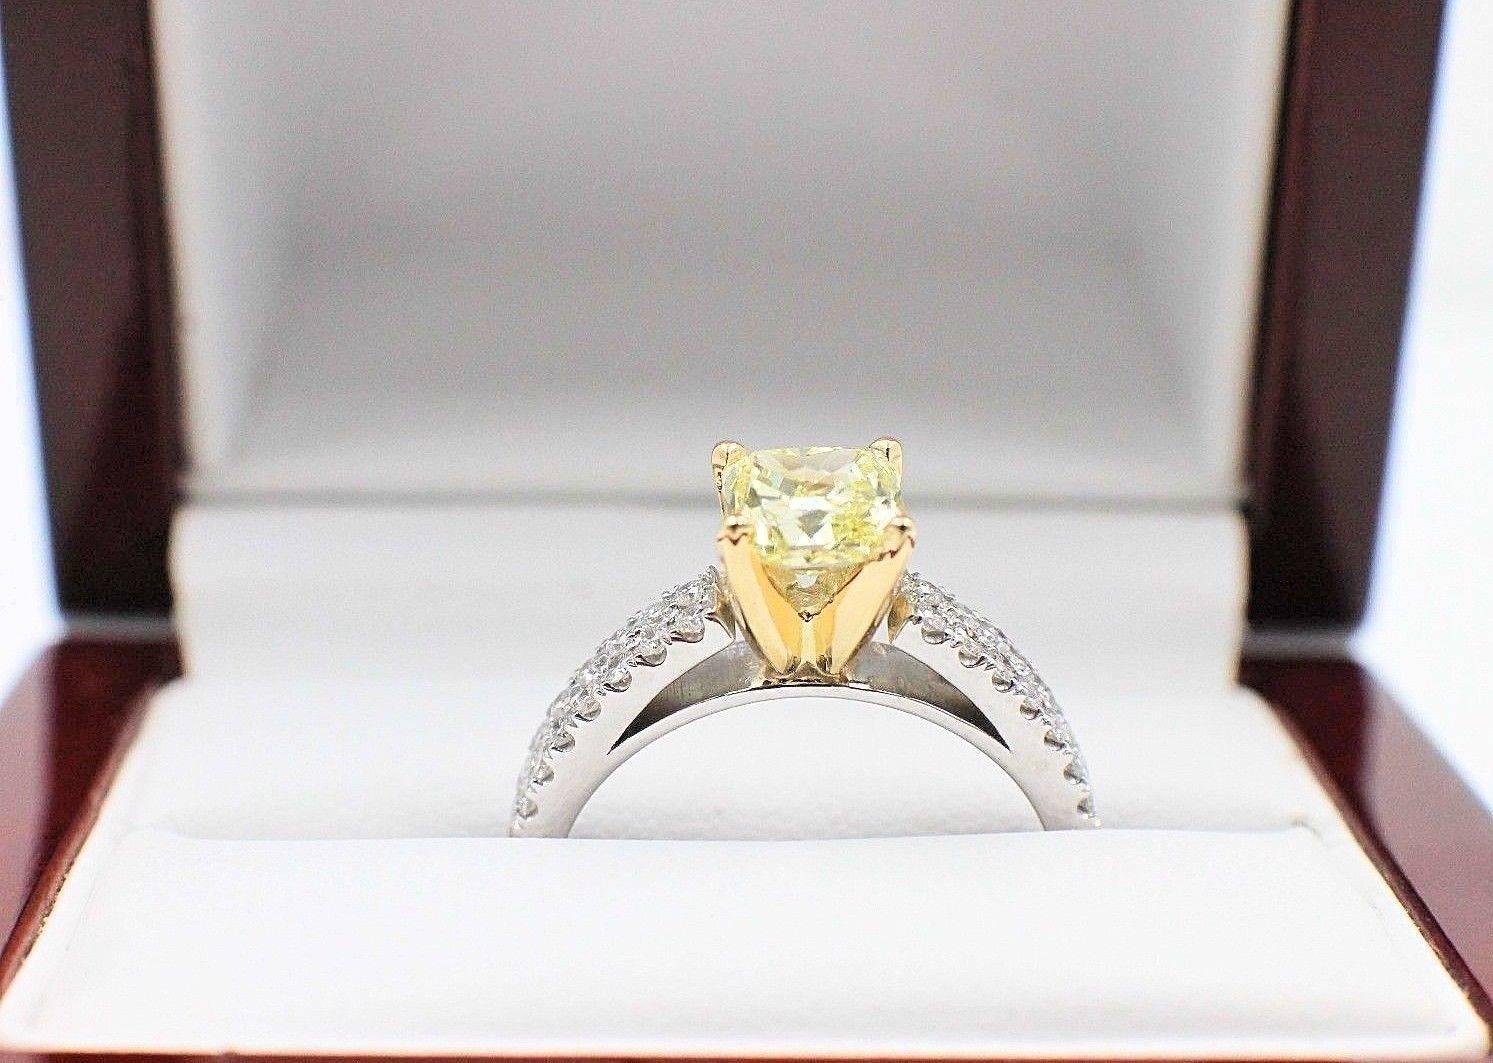 Fancy Yellow Diamond Engagement Ring with Diamond Band
Cetification:  GIA #2151128830
Metal:  18KT White & Yellow Gold
Size:  7.25 - Sizable
Total Carat Weight:  1.62 TCW
Main Diamond:  Radiant Diamond 1.20 CTS
Color & Clarity:  Fancy Yellow -